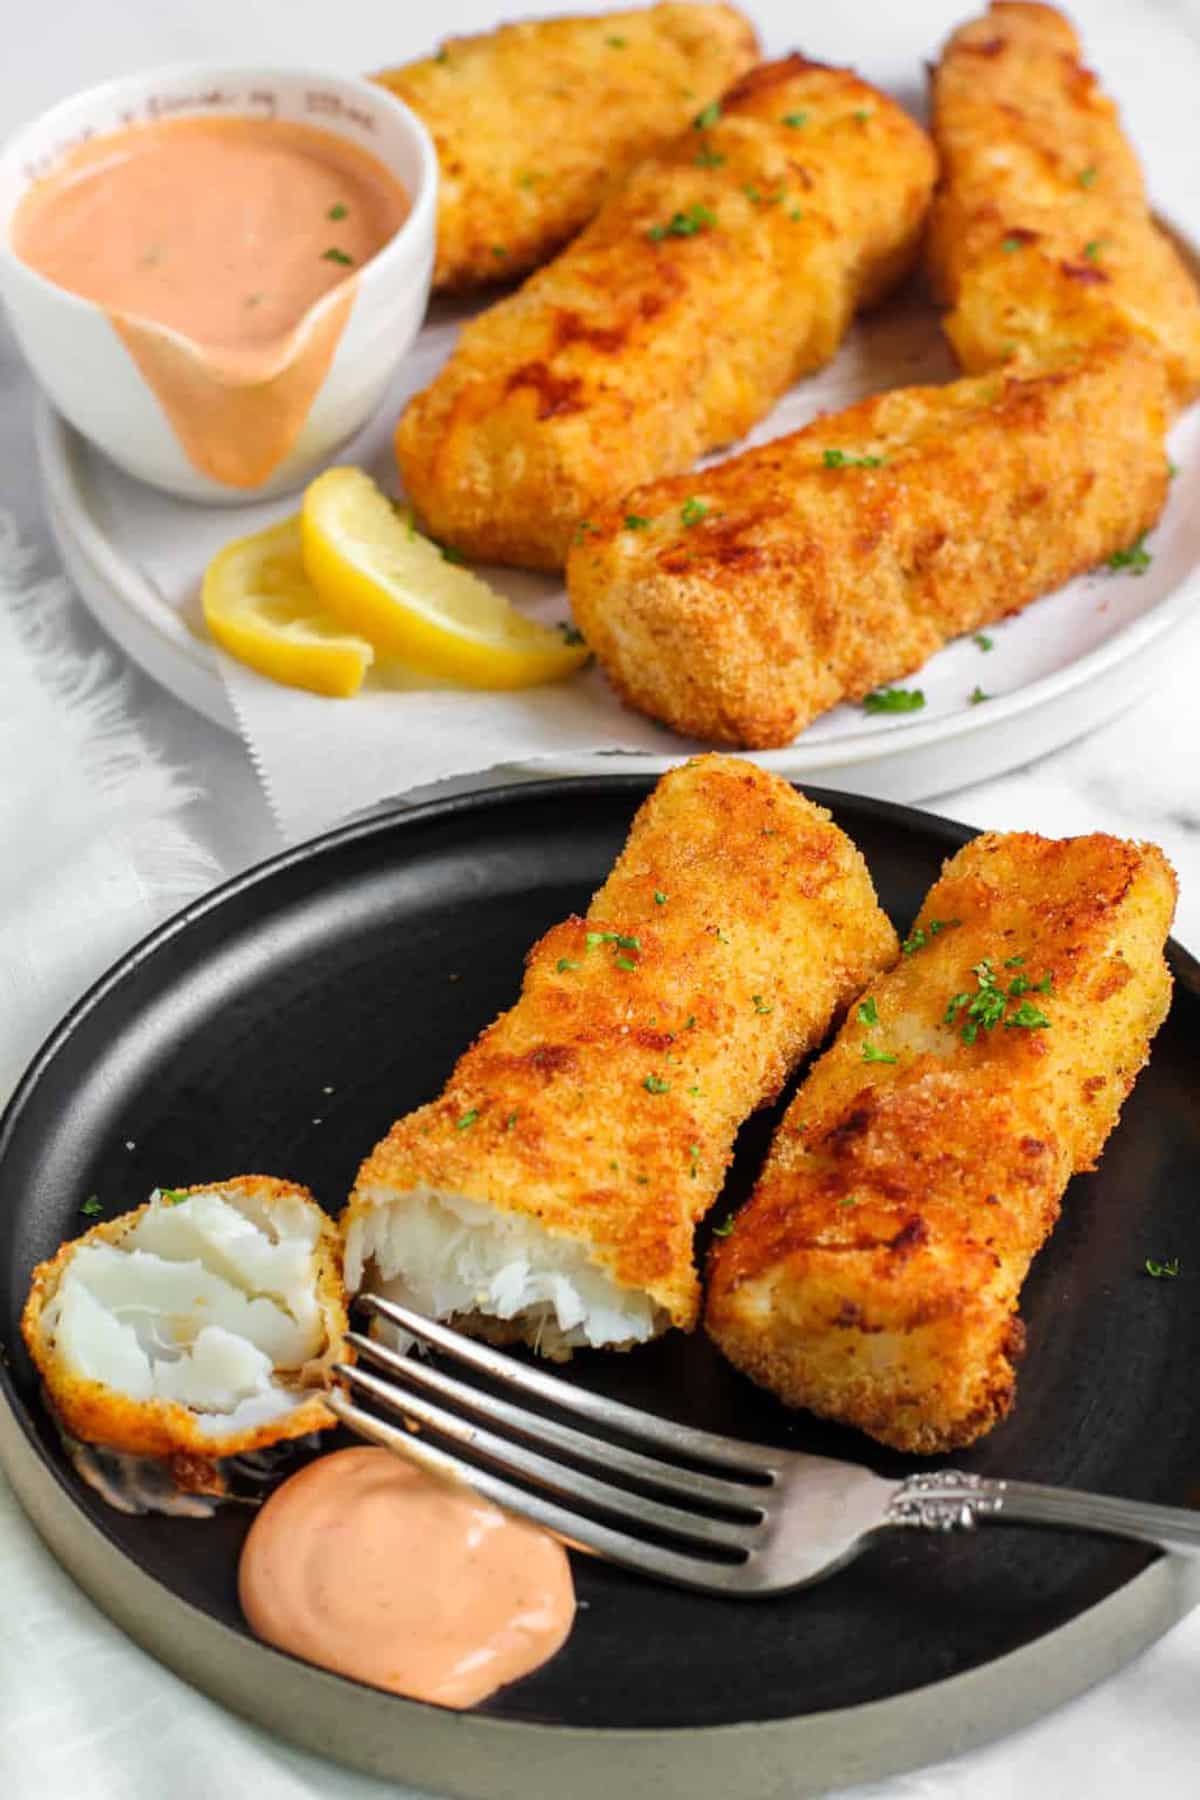 Spiced coating airfryer fish sticks